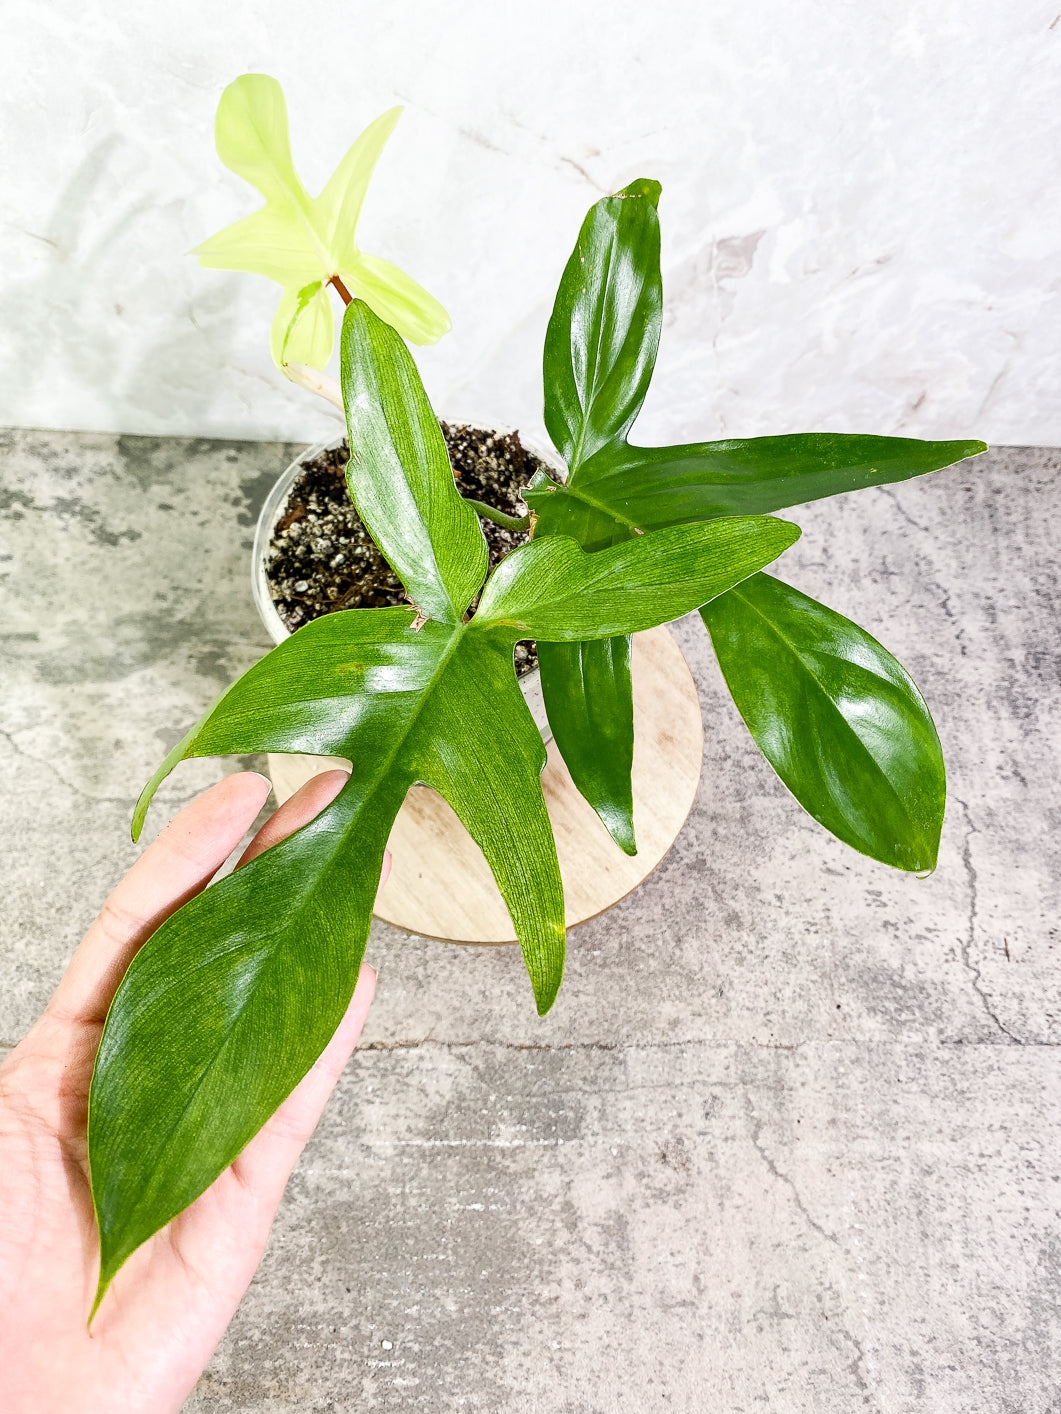 Philodendron Florida ghost mint variegated 4 leaves 1 sprout fully rooted